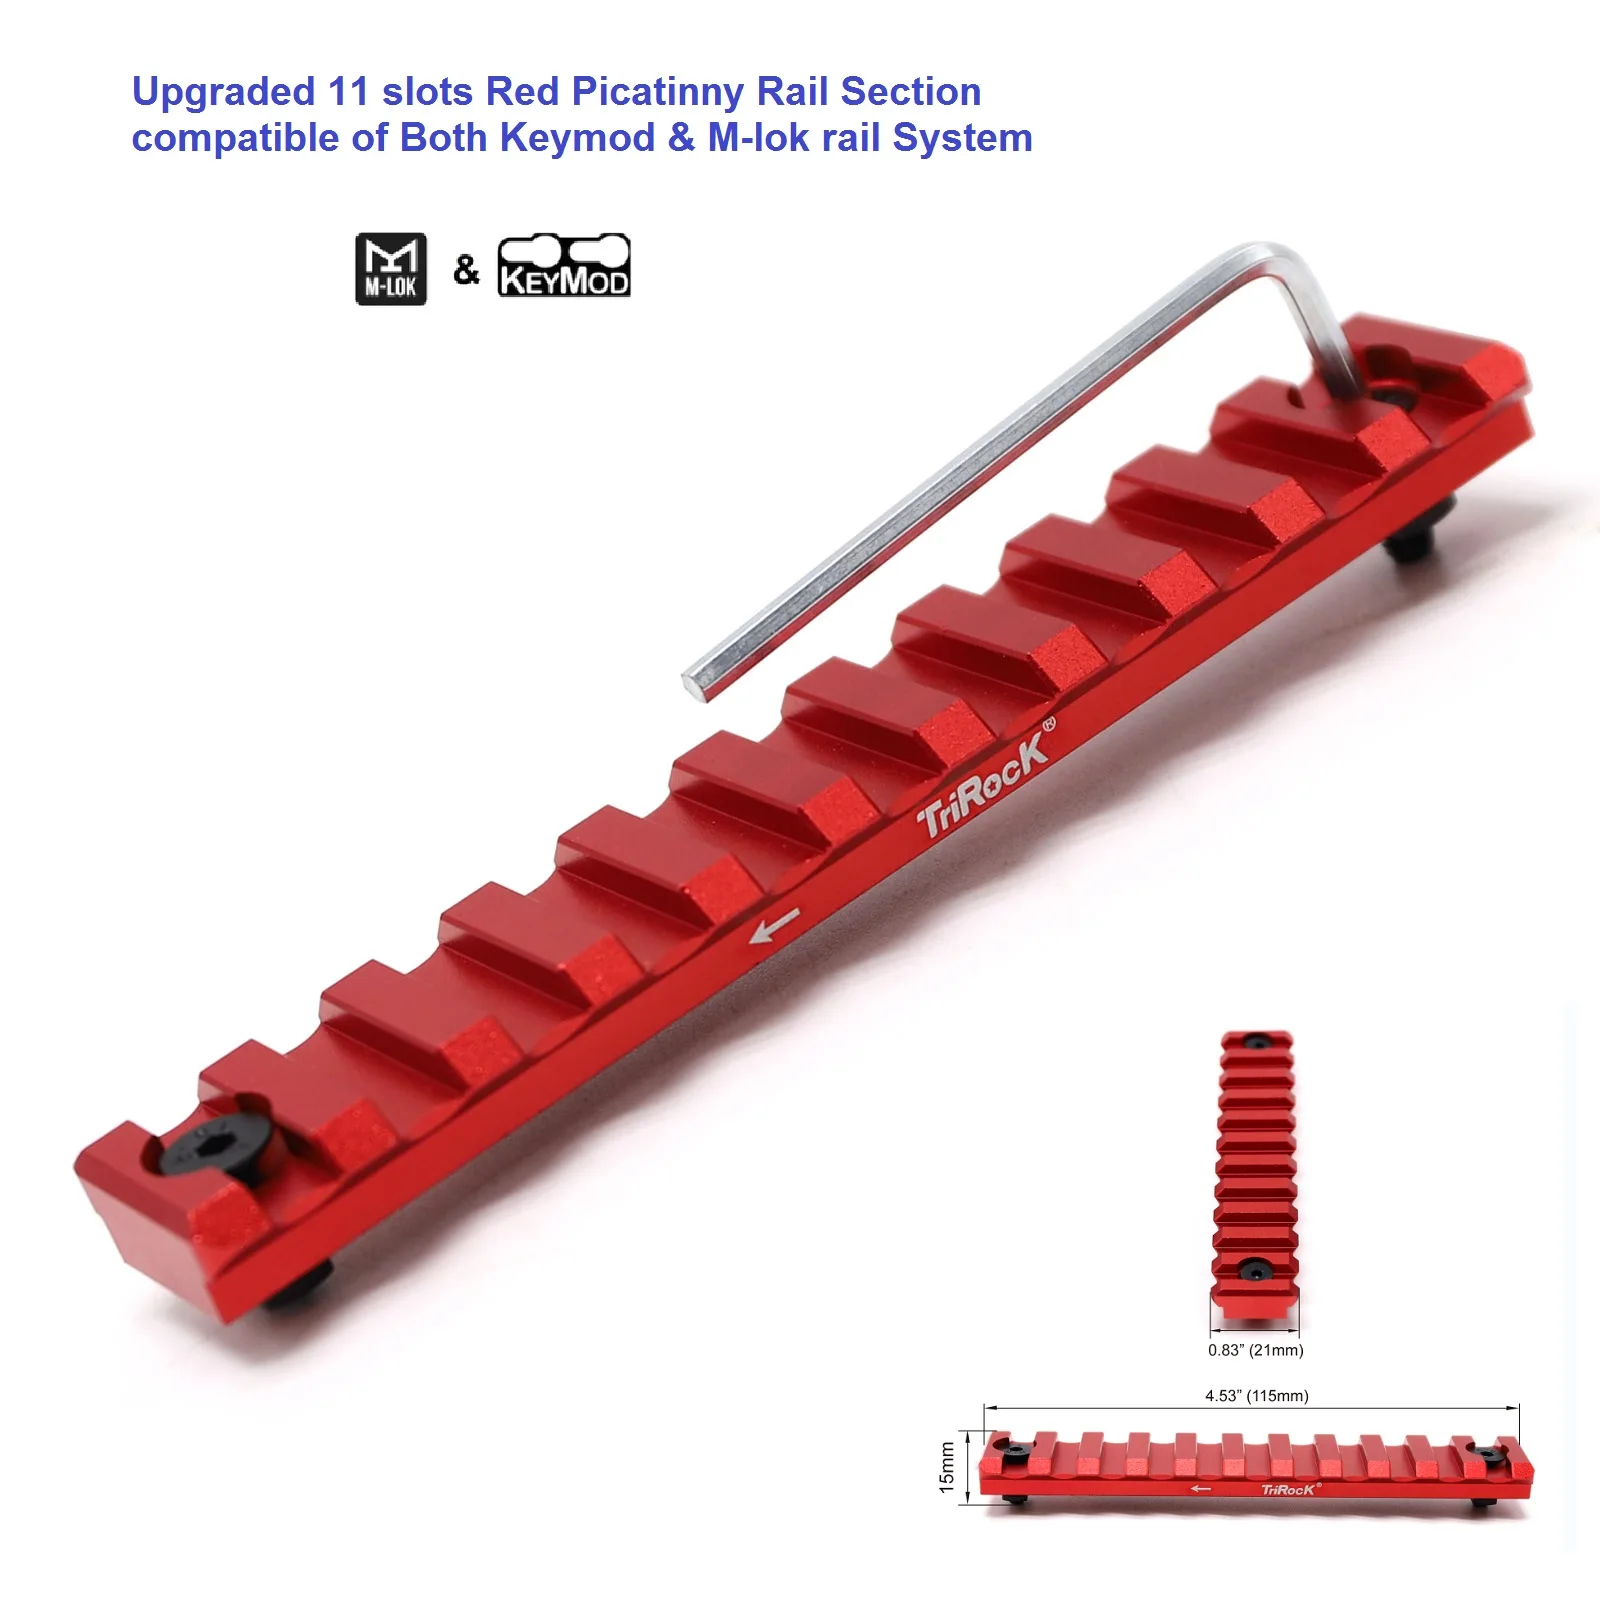 Aplus Universal Upgraded optional 3,5,7,9,11,13 slots Red Picatinny Rail Section compatible of Both Keymod&M-lok rail System